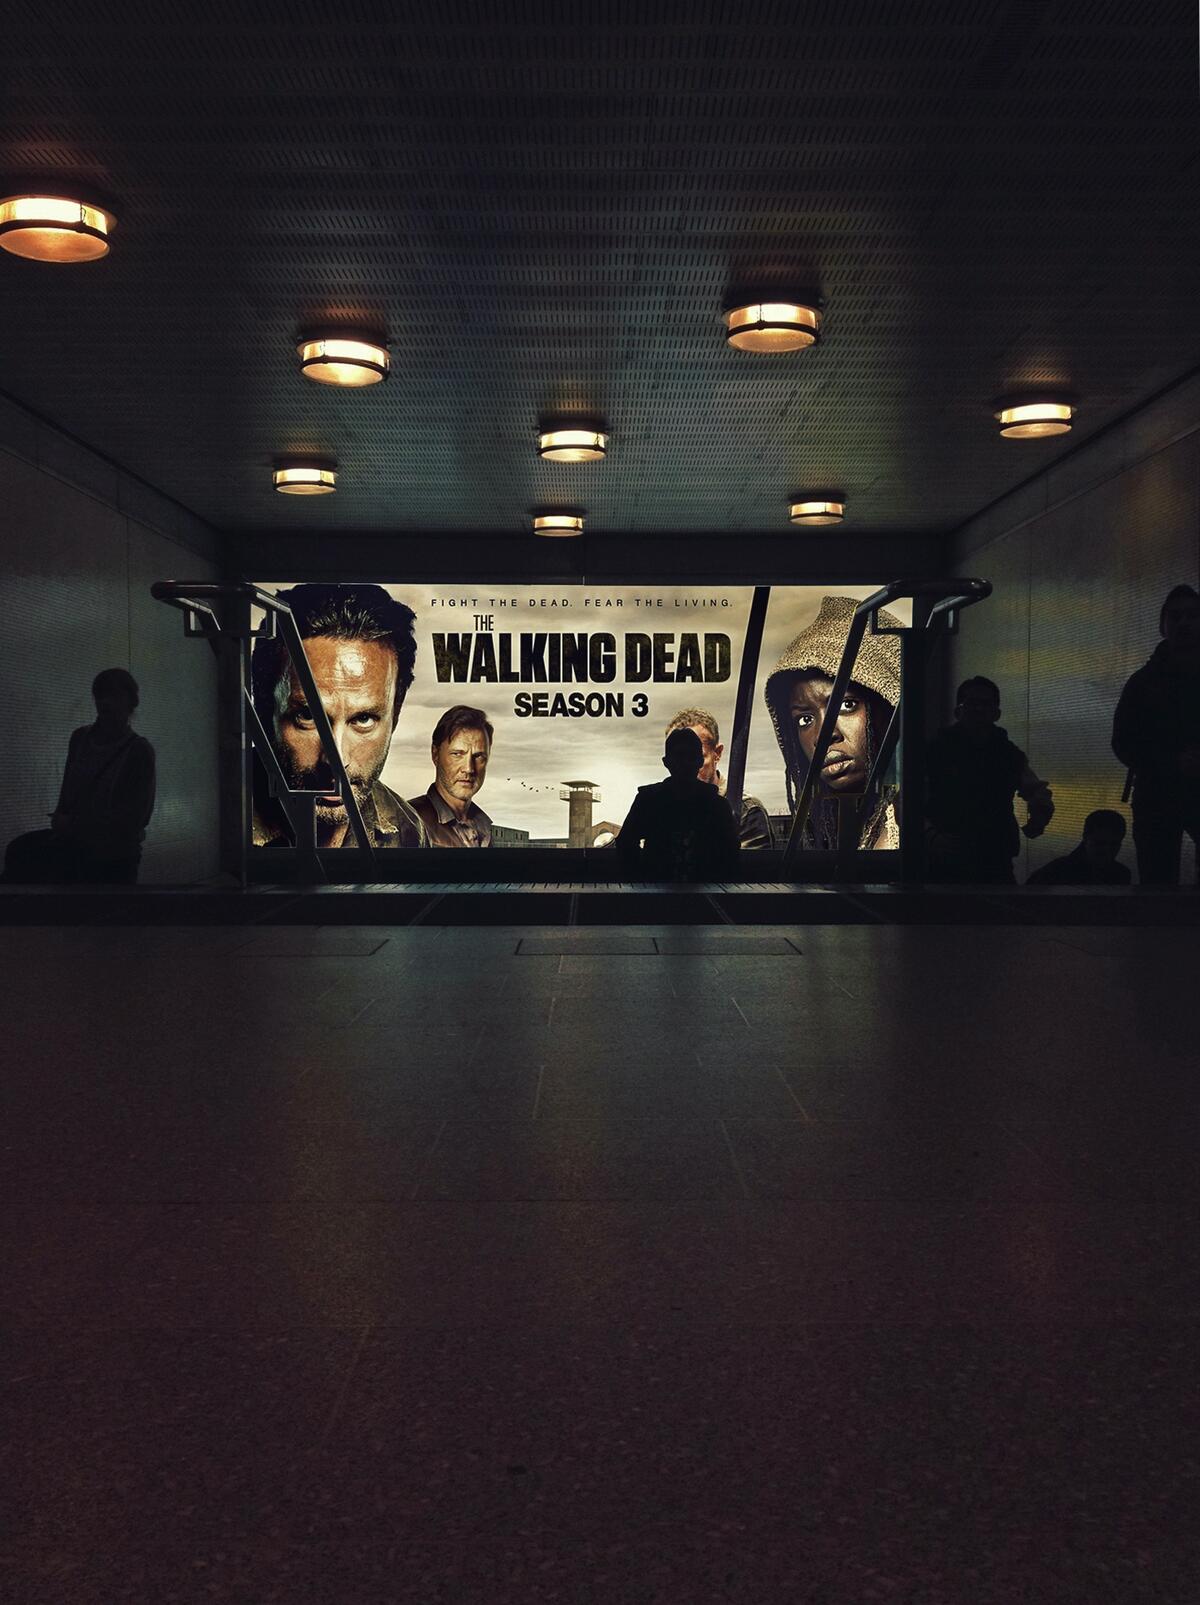 The Walking Dead on the movie poster.